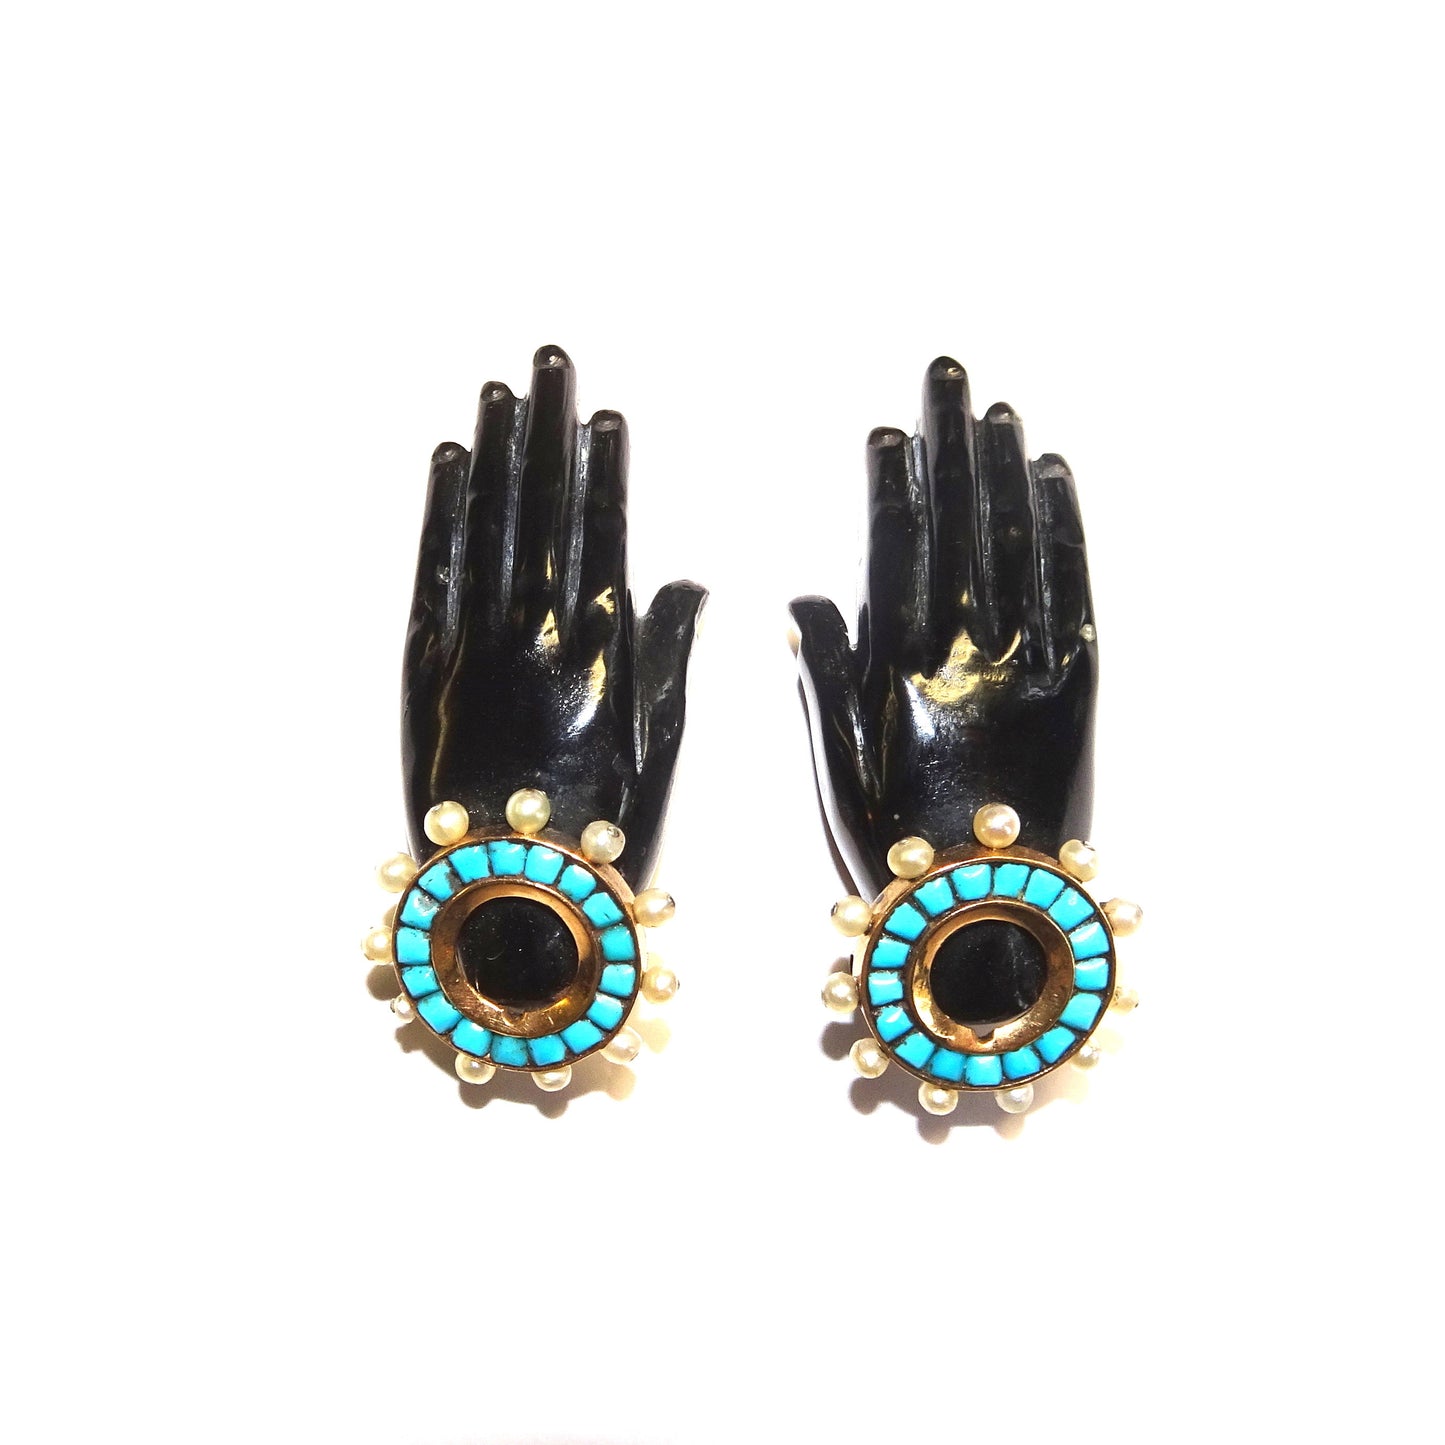 Rene Boivin French 1930s 18KT Yellow Gold Black Coral, Natural Pearl & Turquoise Hand Brooches front